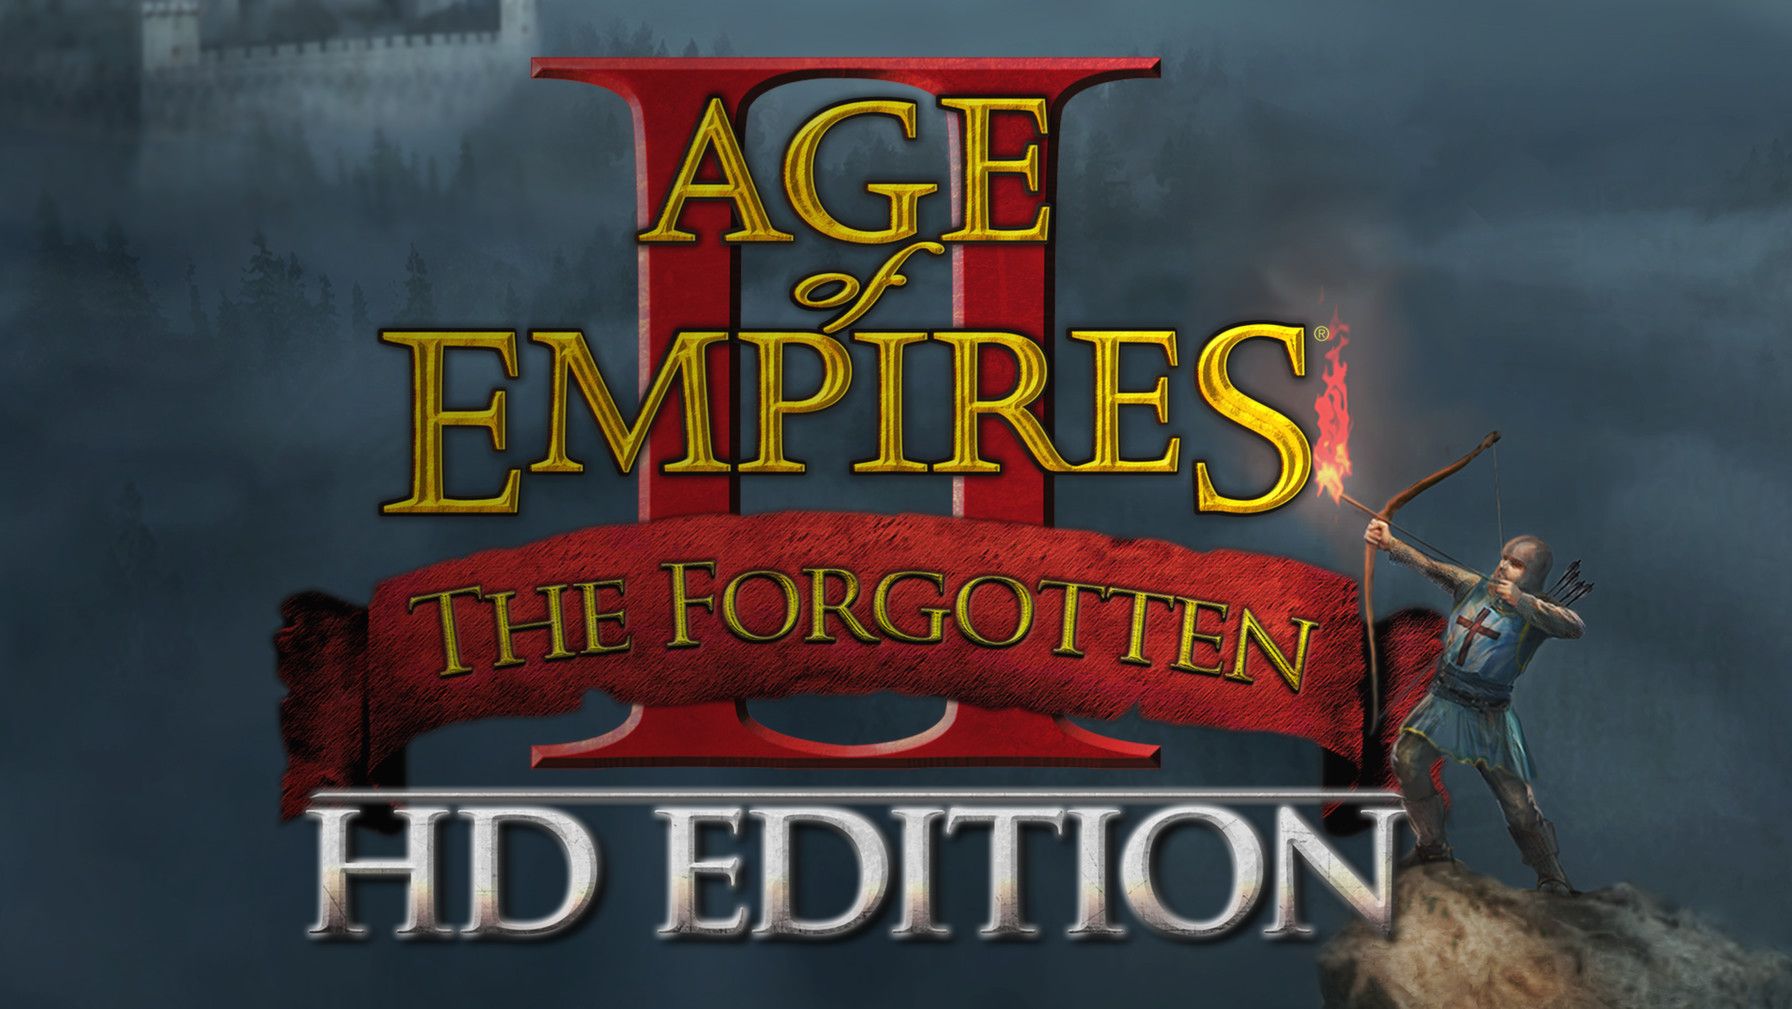 Age of Empires II HD: The Forgotten. Age of Empires Series